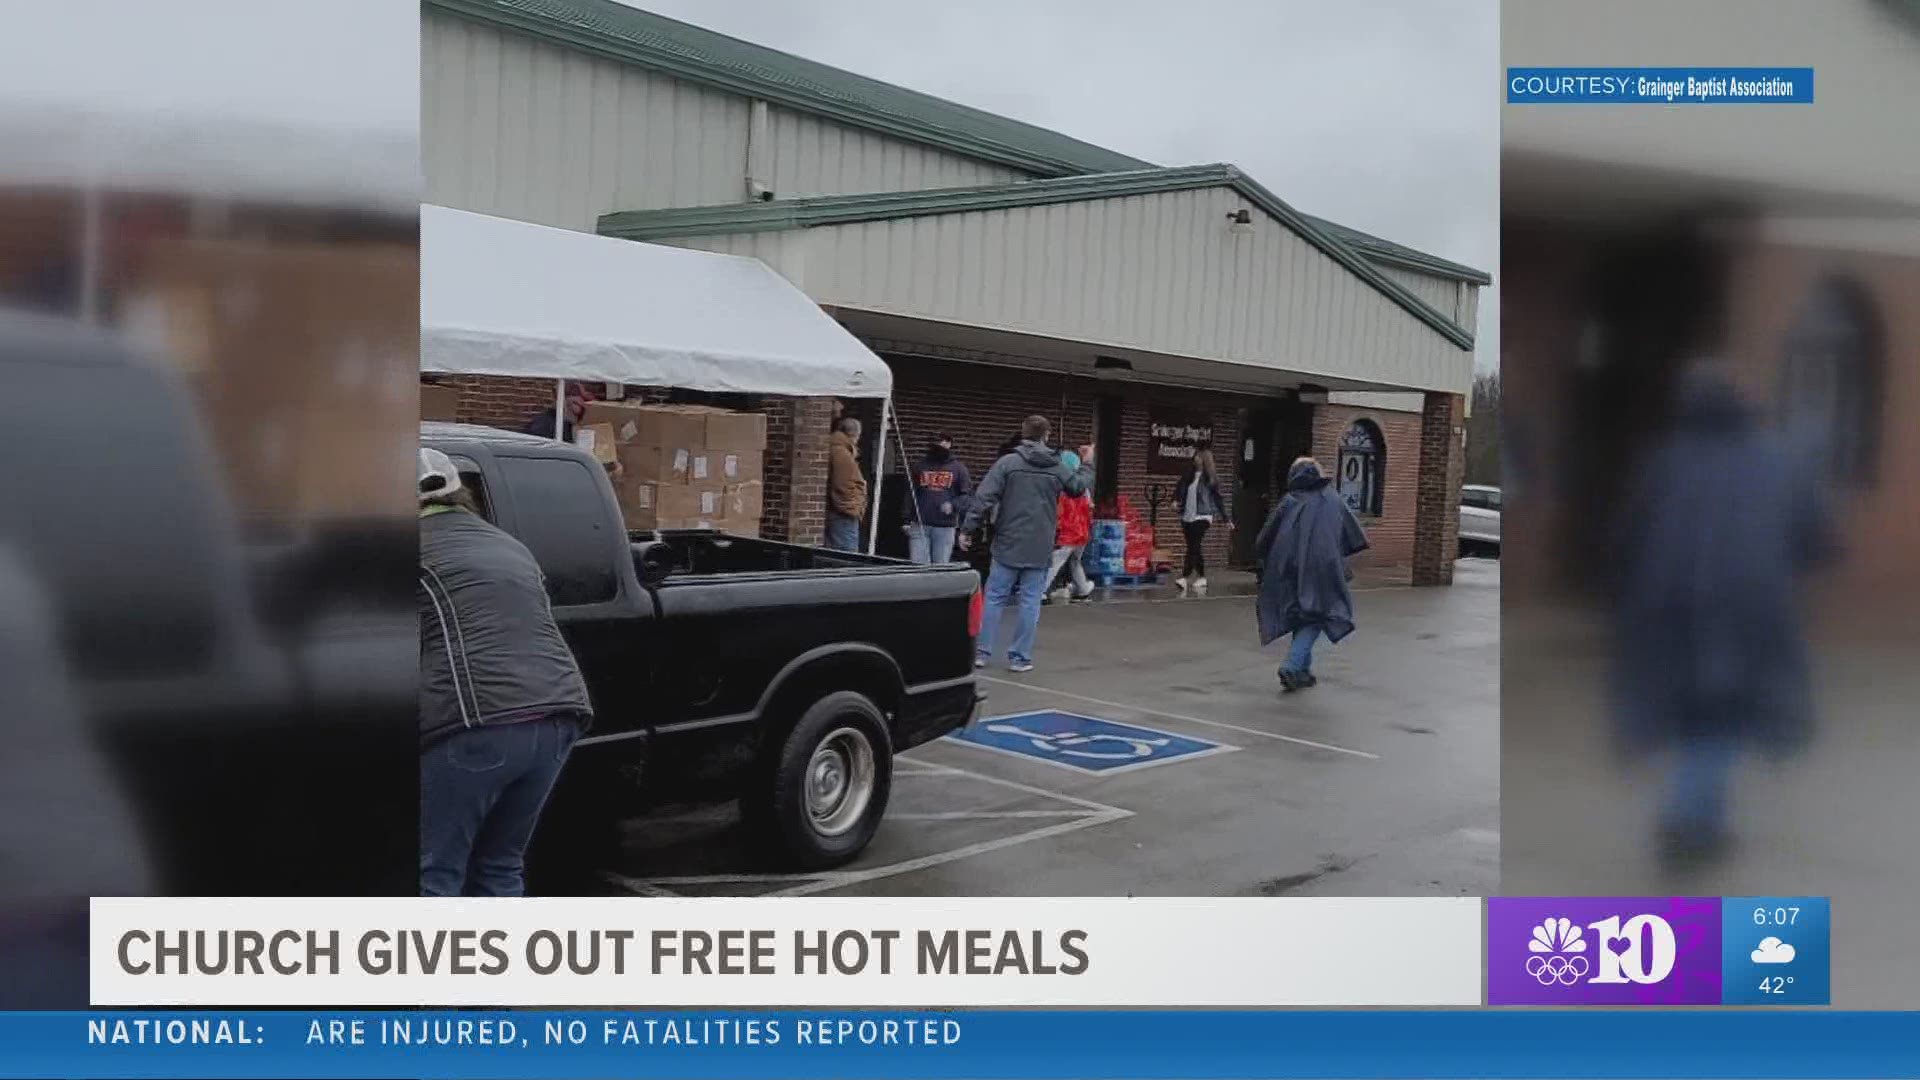 Families came by in their cars to pick up their Valentine's Day dinners, which included dishes like chicken casserole, corn and green beans.